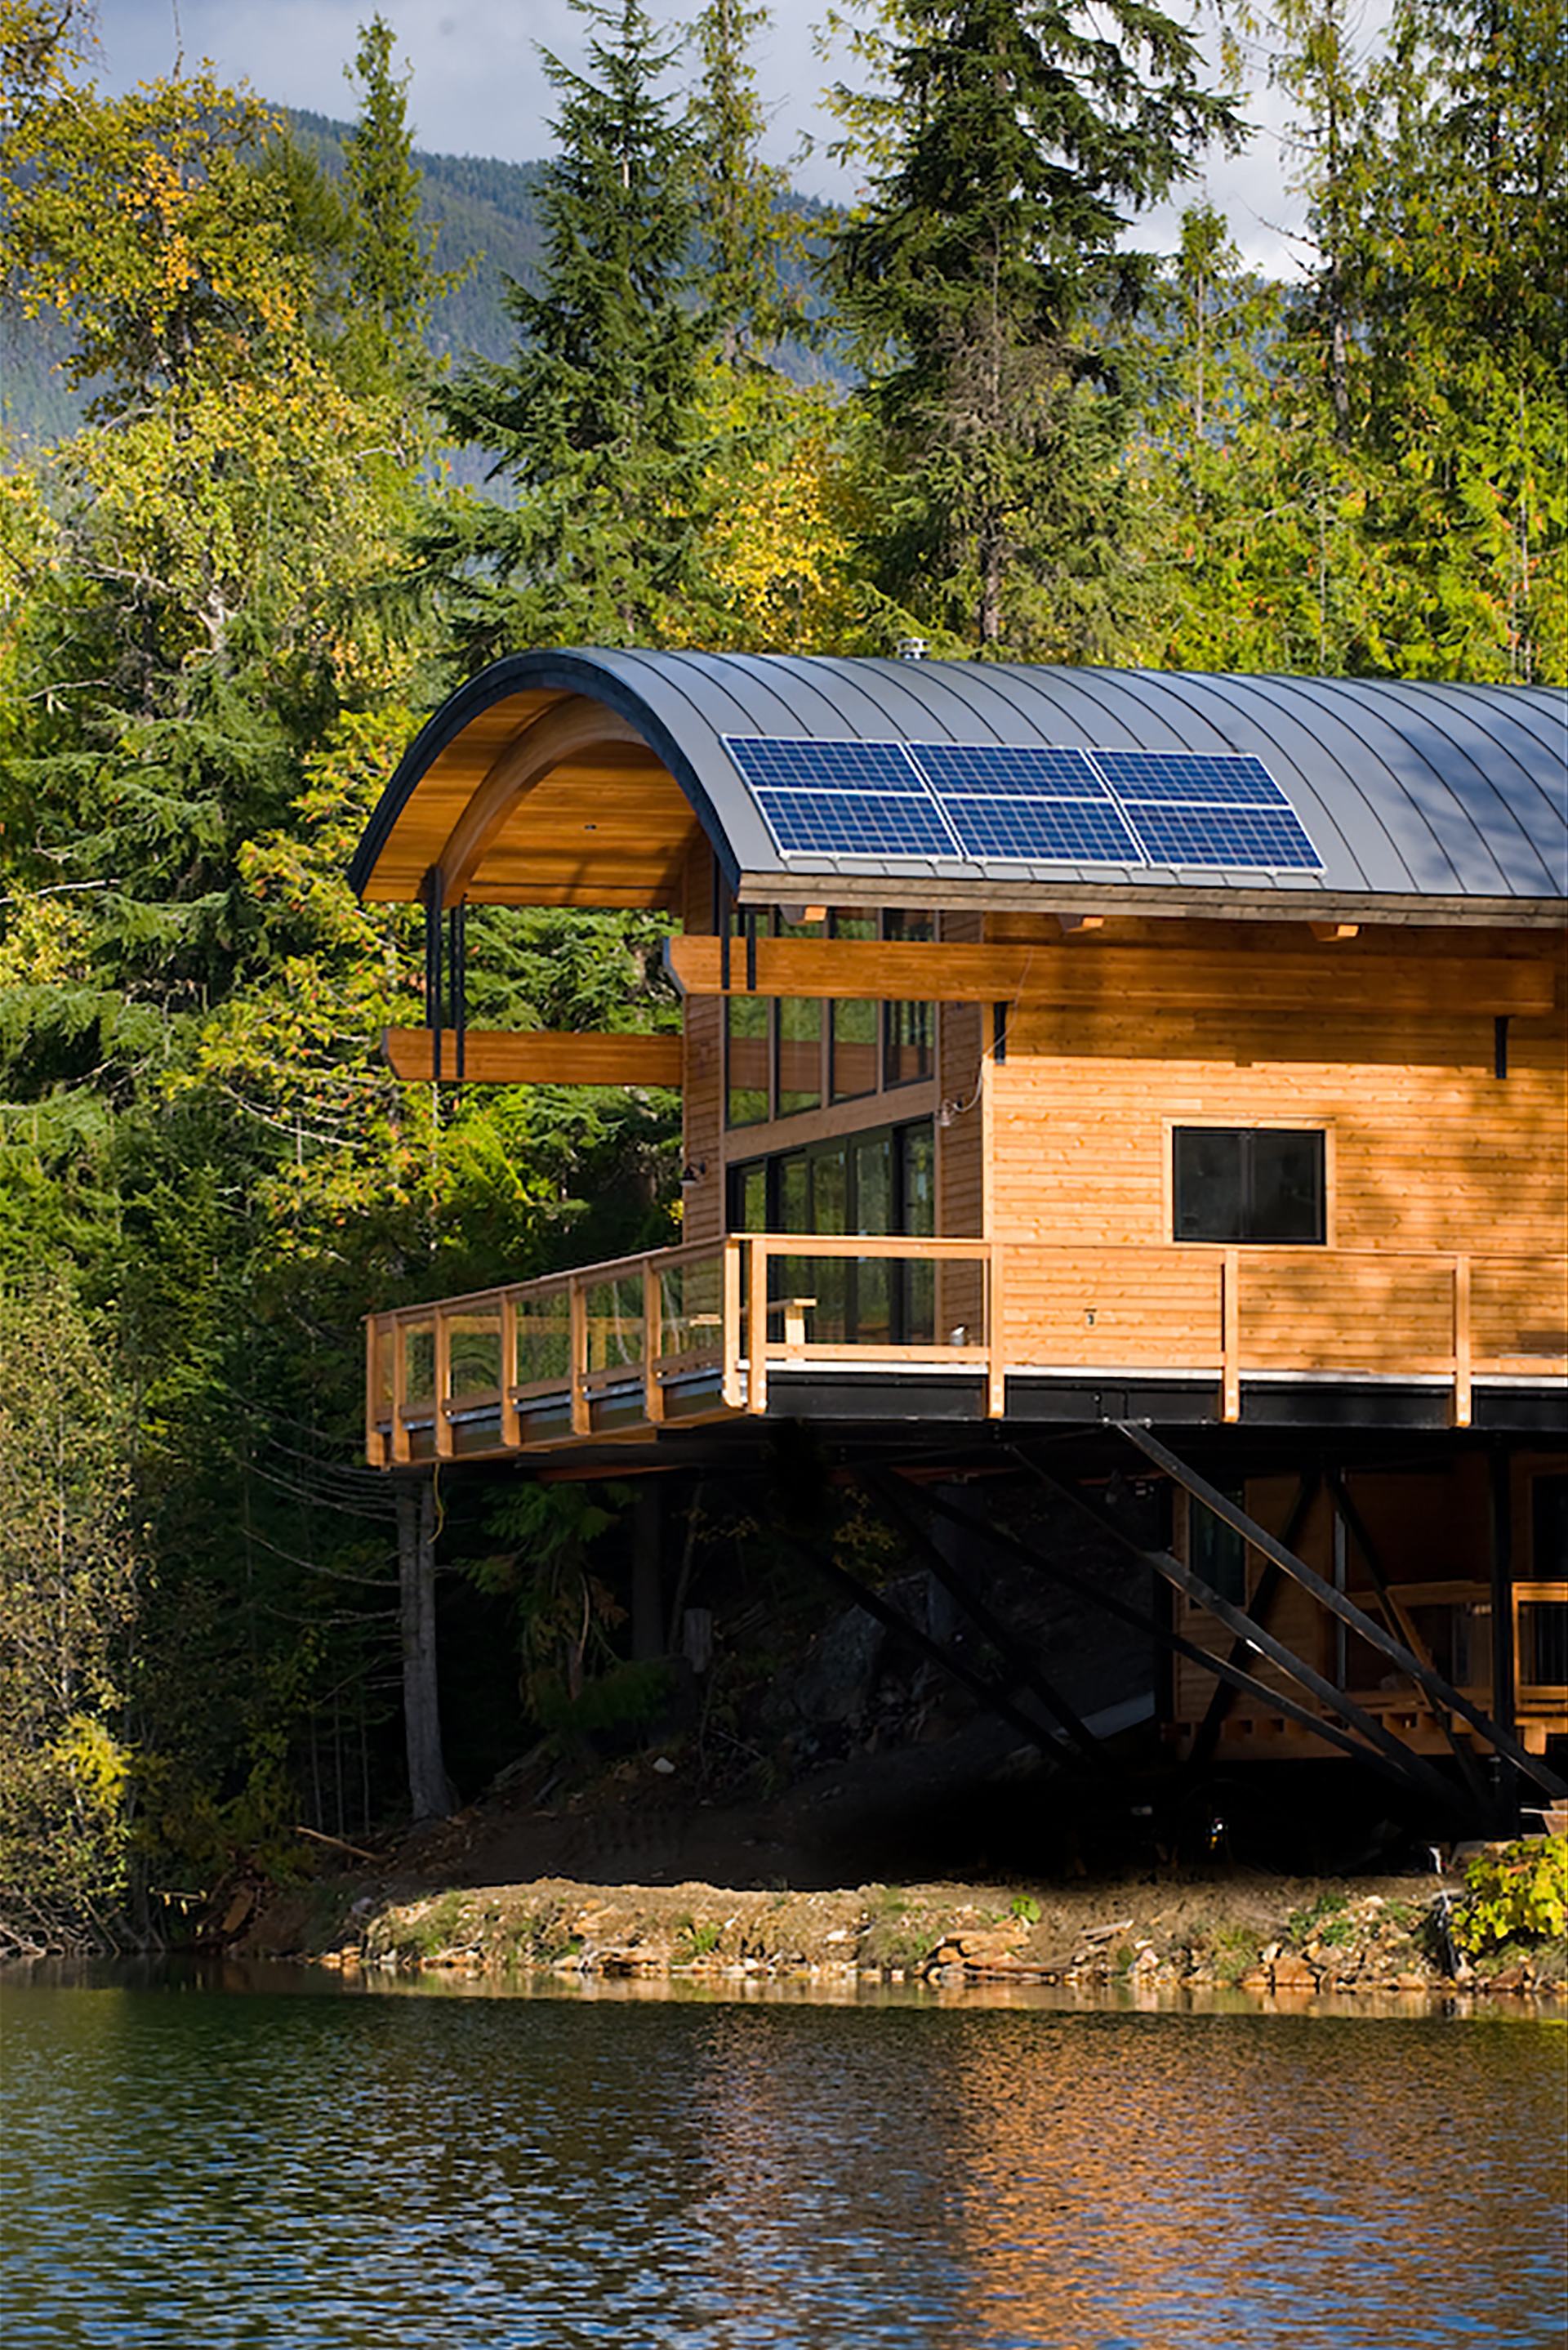 timber-enhanced lakeside house with curved roof and solar panels